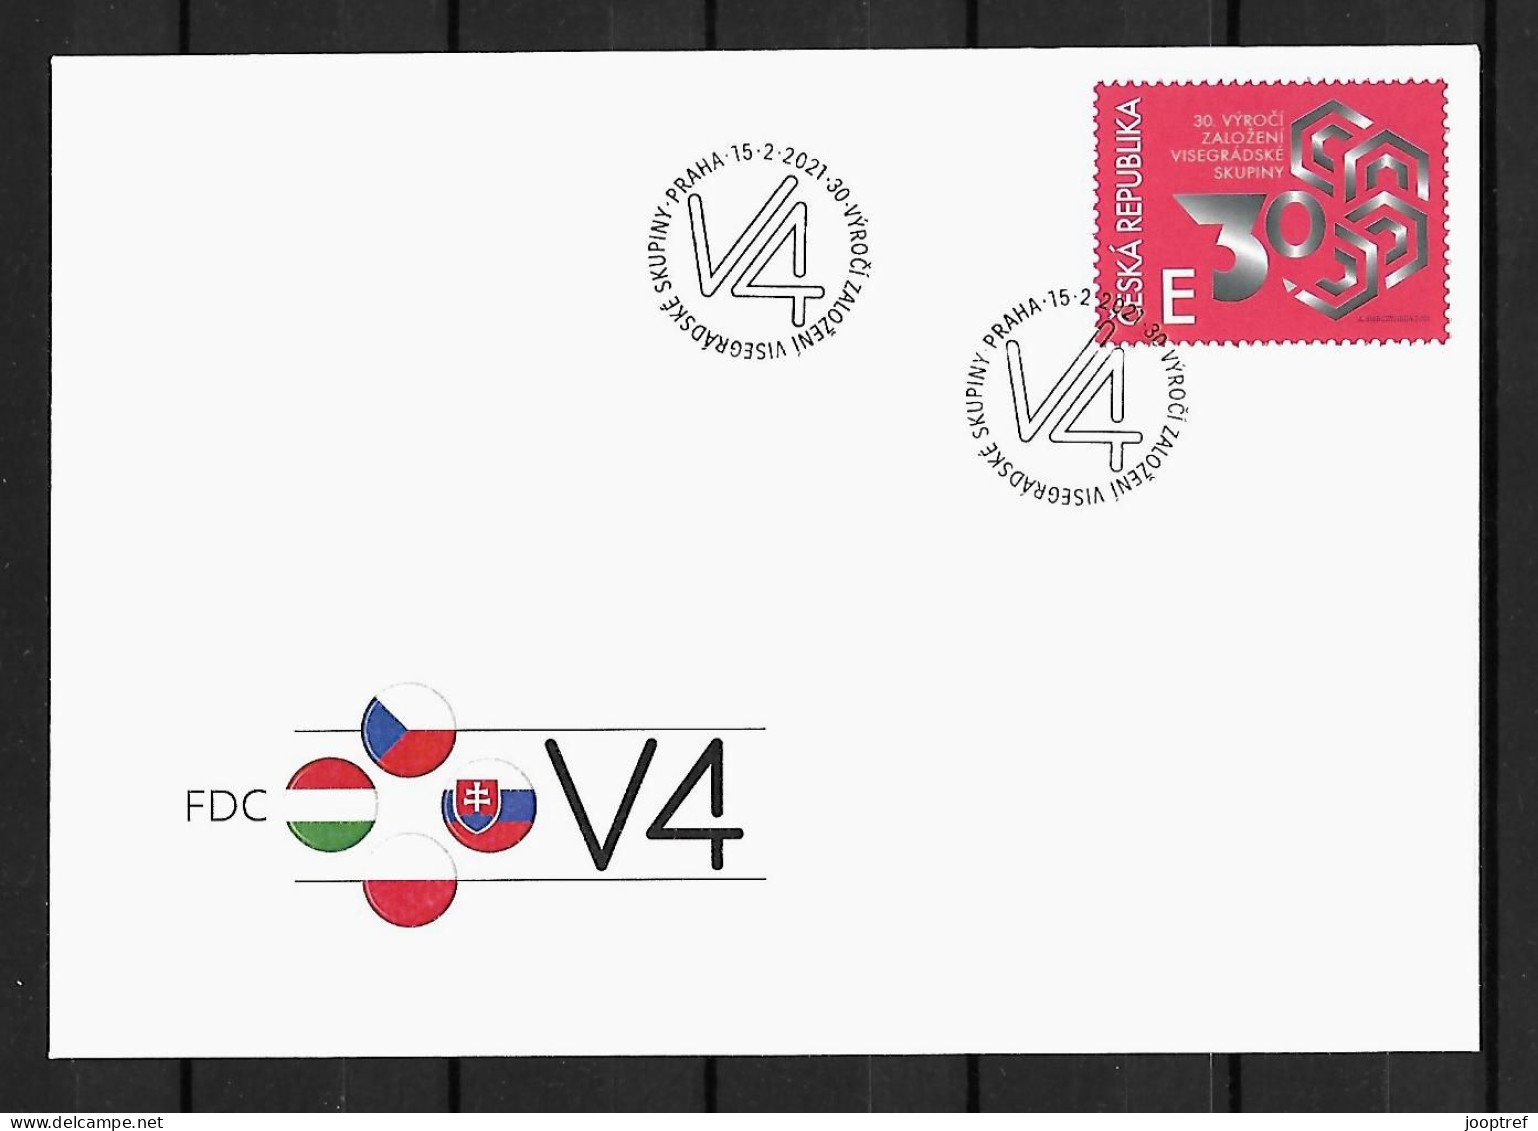 2021 Joint Czech Republic - Hungary - Poland - Slovakia, FDC CZECH REPUBLIC WITH 1 STAMP: Visegrad 30 Years - Joint Issues